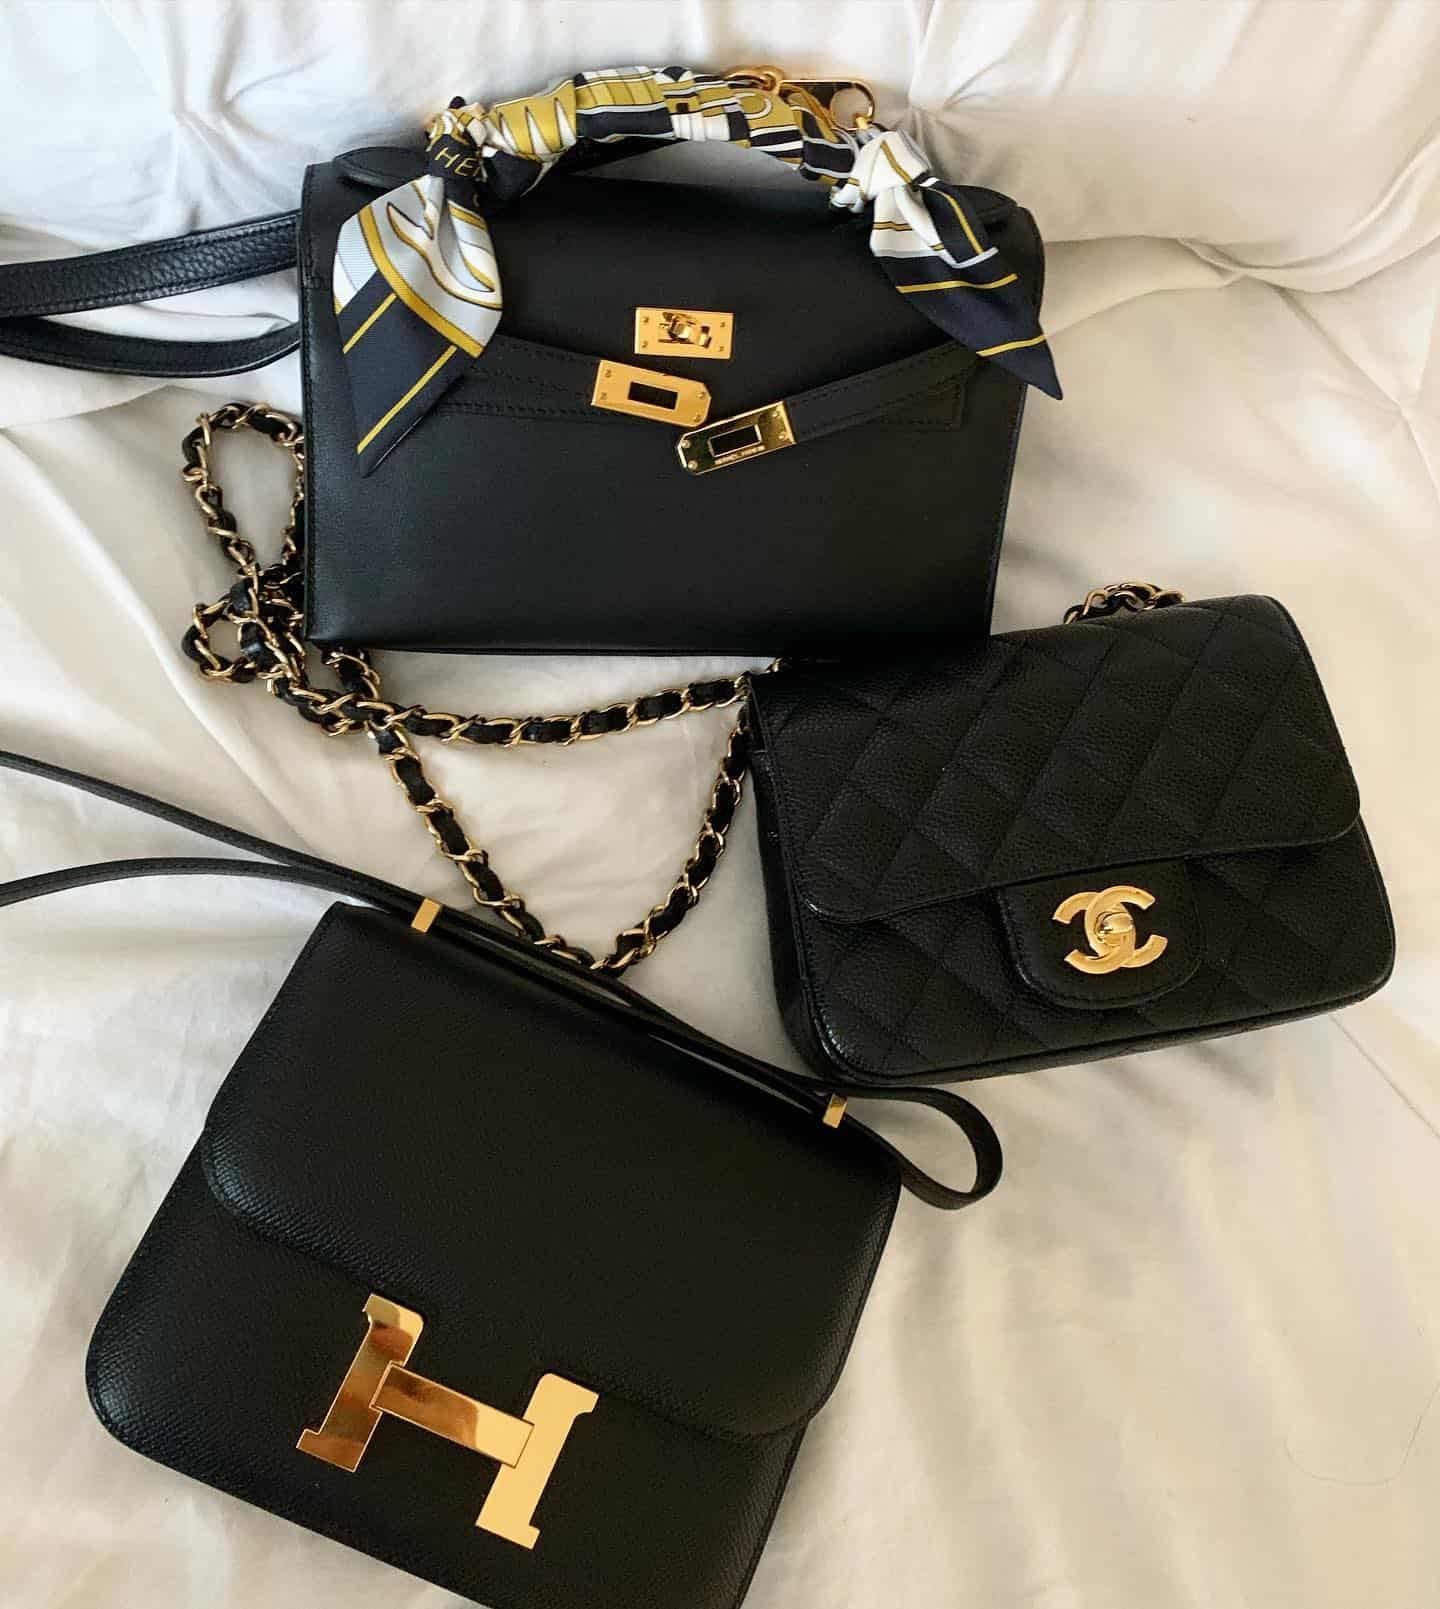 Black Hermes bags and Chanel